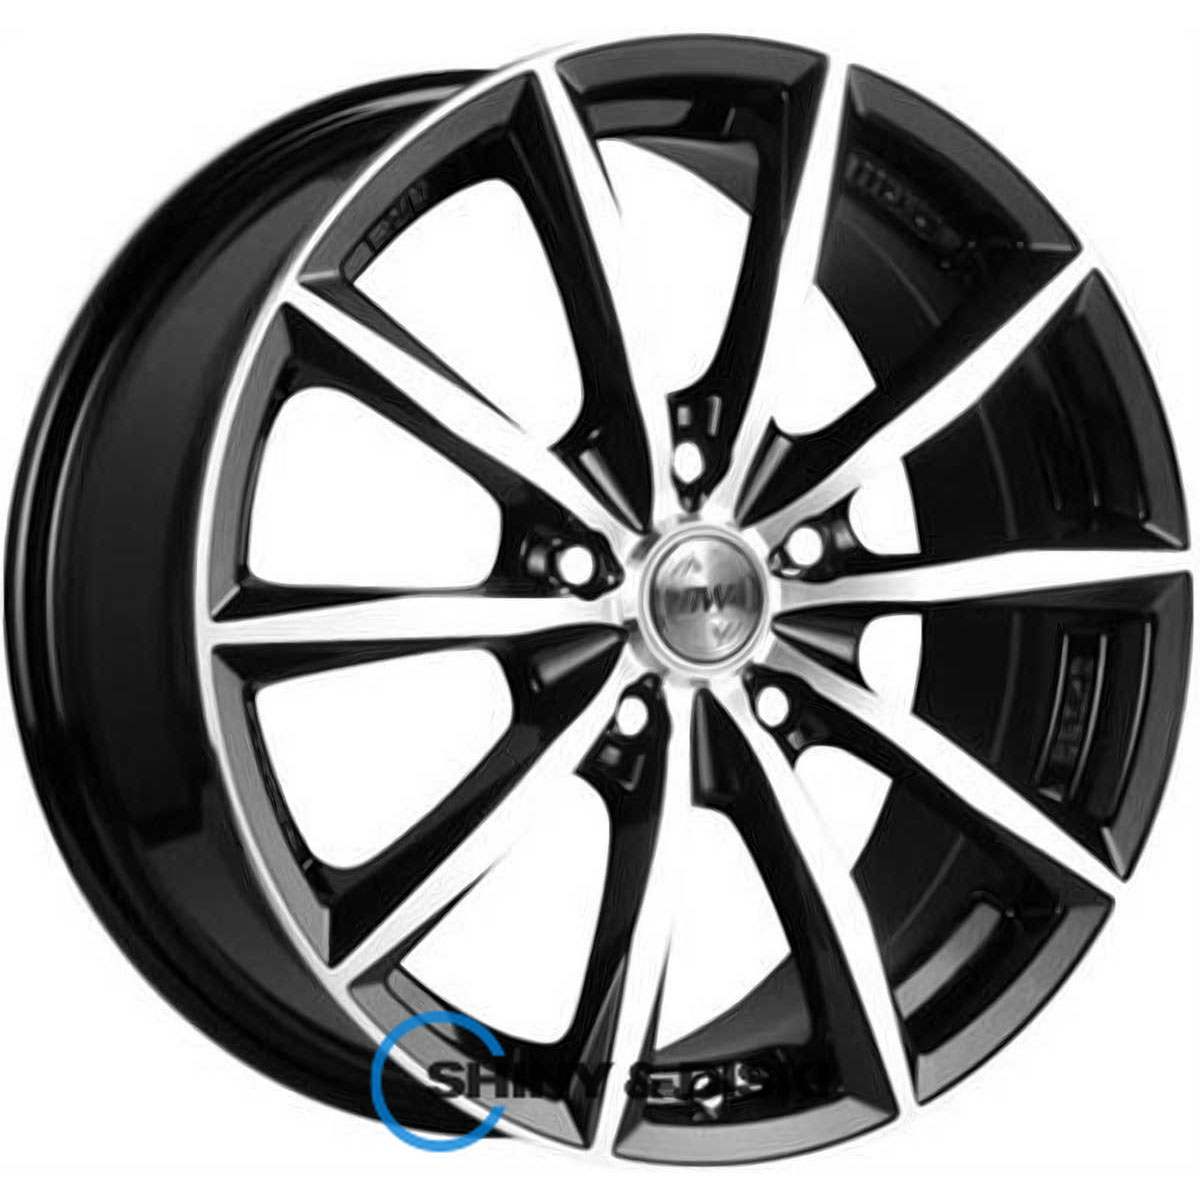 rs tuning h-536 ddnfp r16 w7 pcd4x114.3 et40 dia73.1